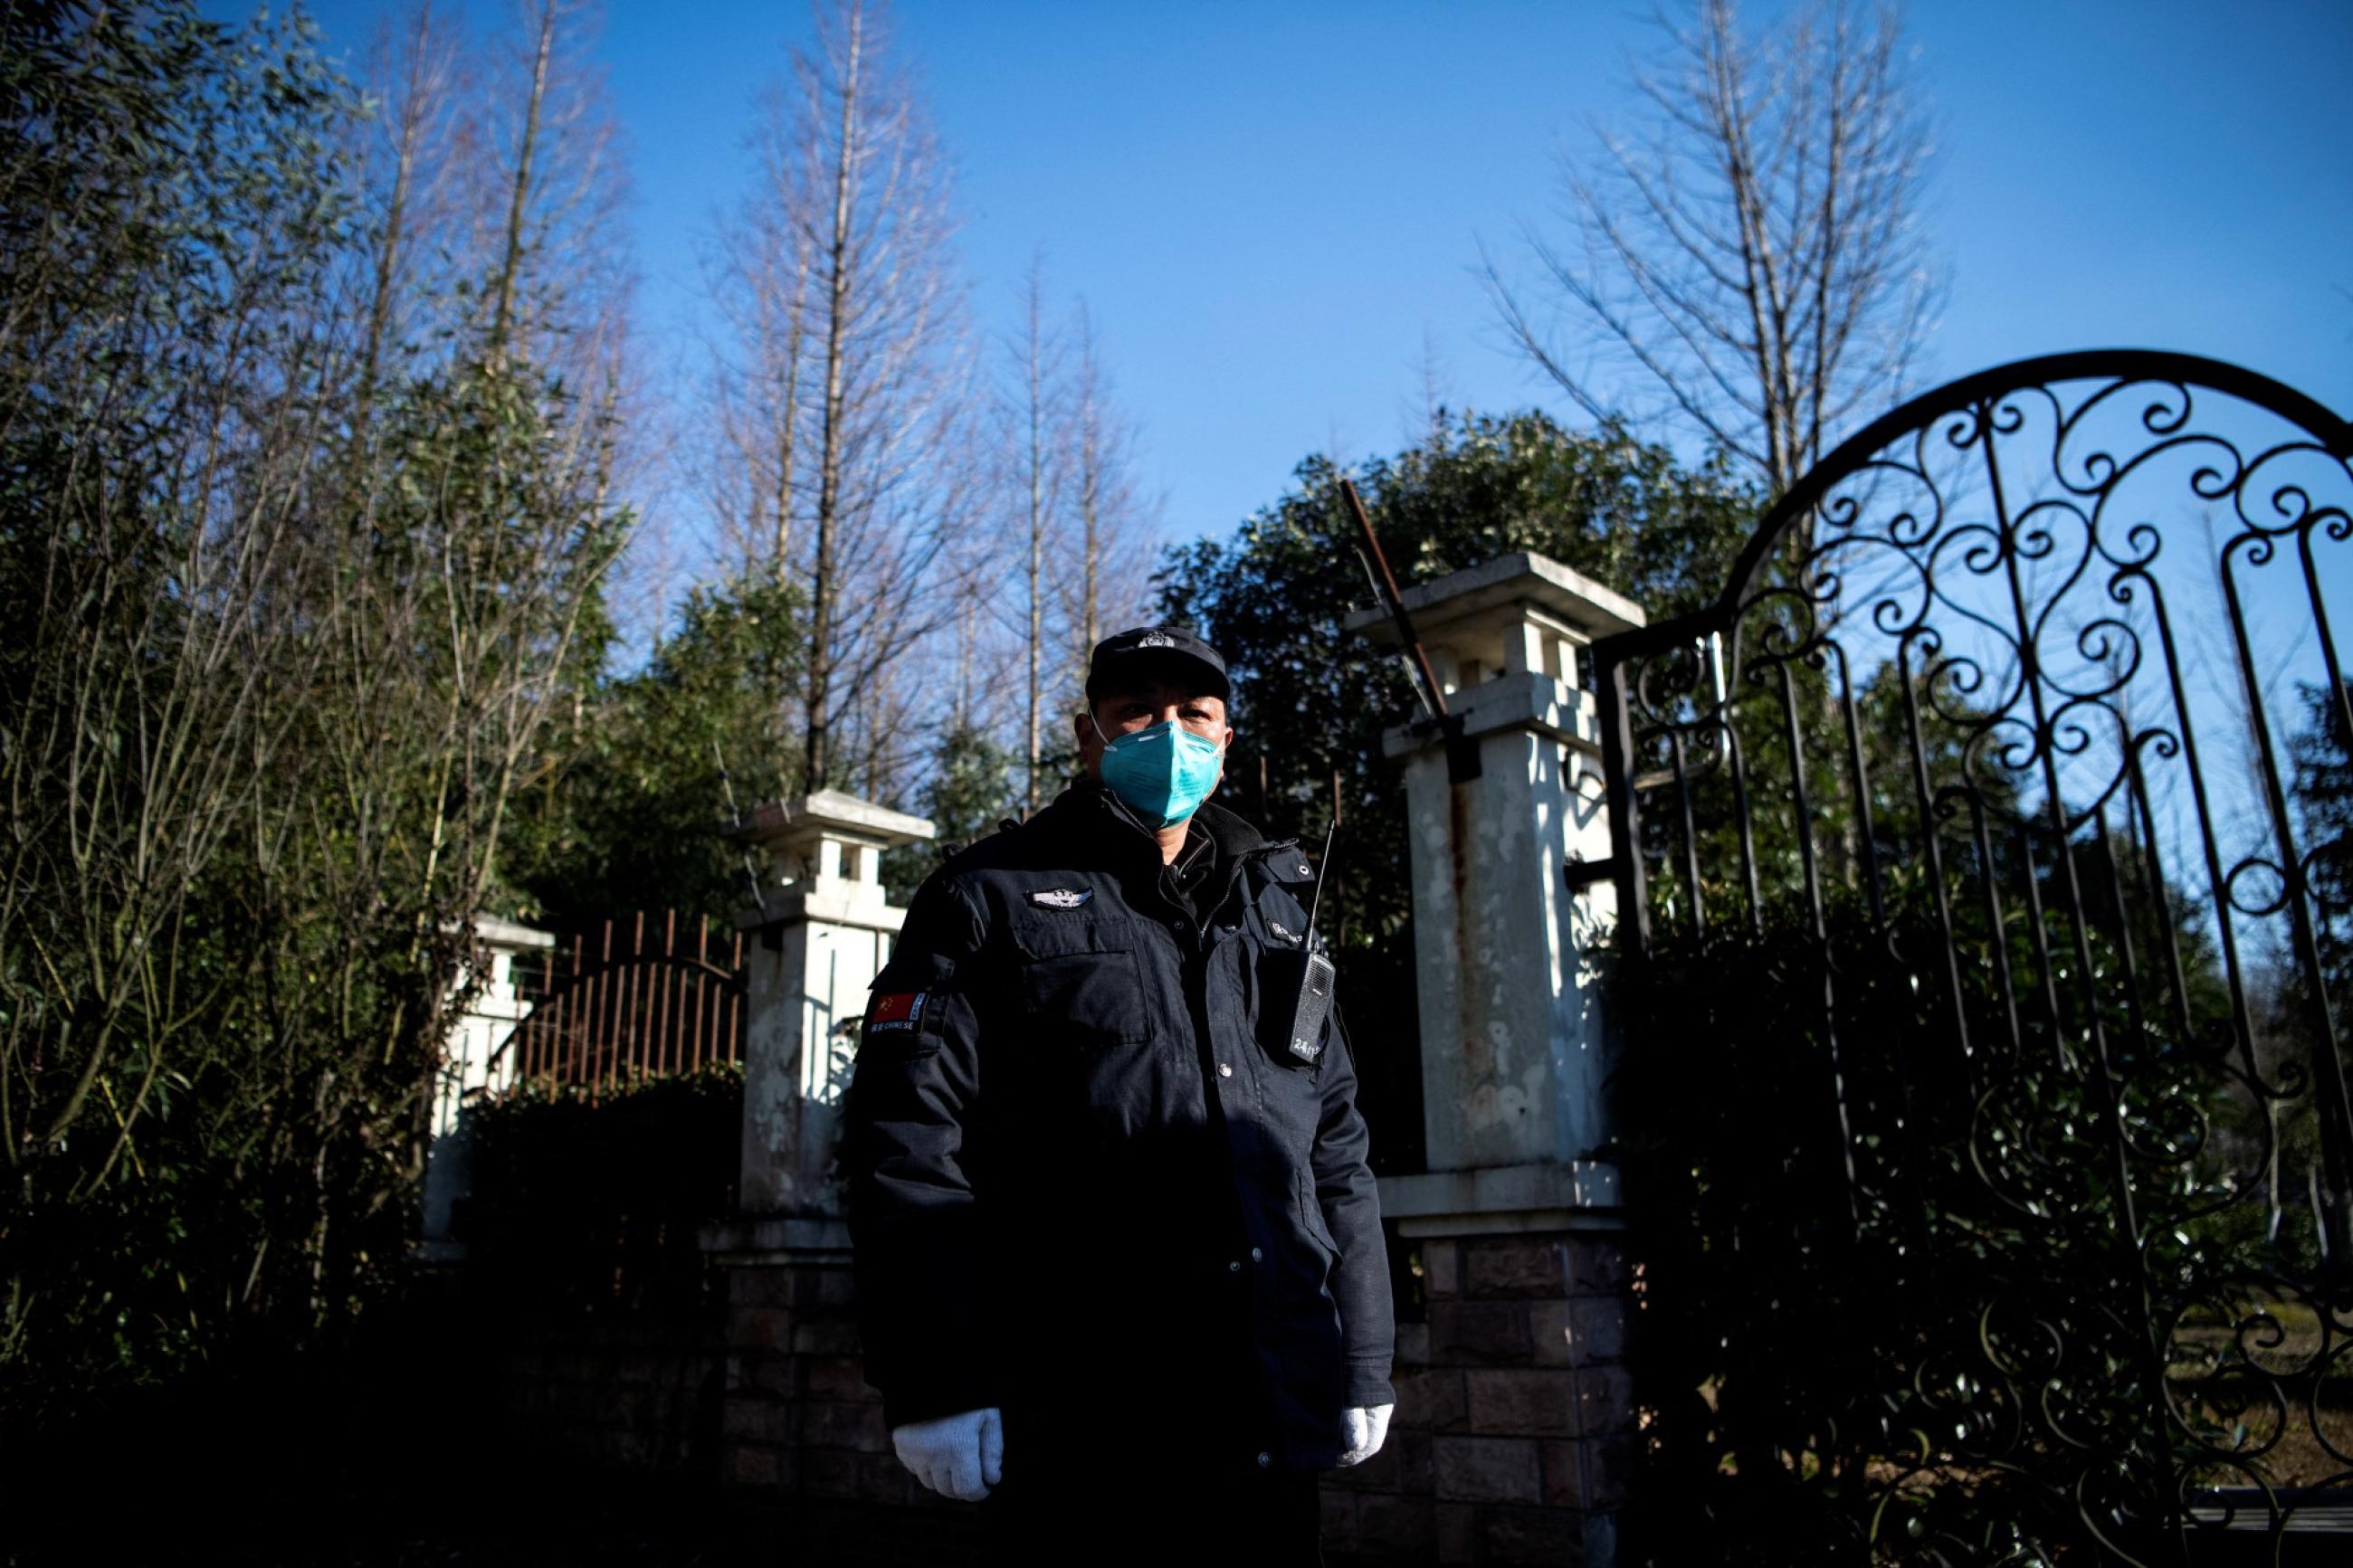 A guard stands at the gate of the Shanghai Public Clinical Center Shanghai, where the coronavirus patients are quarantined, in Shanghai, China February 17, 2020.